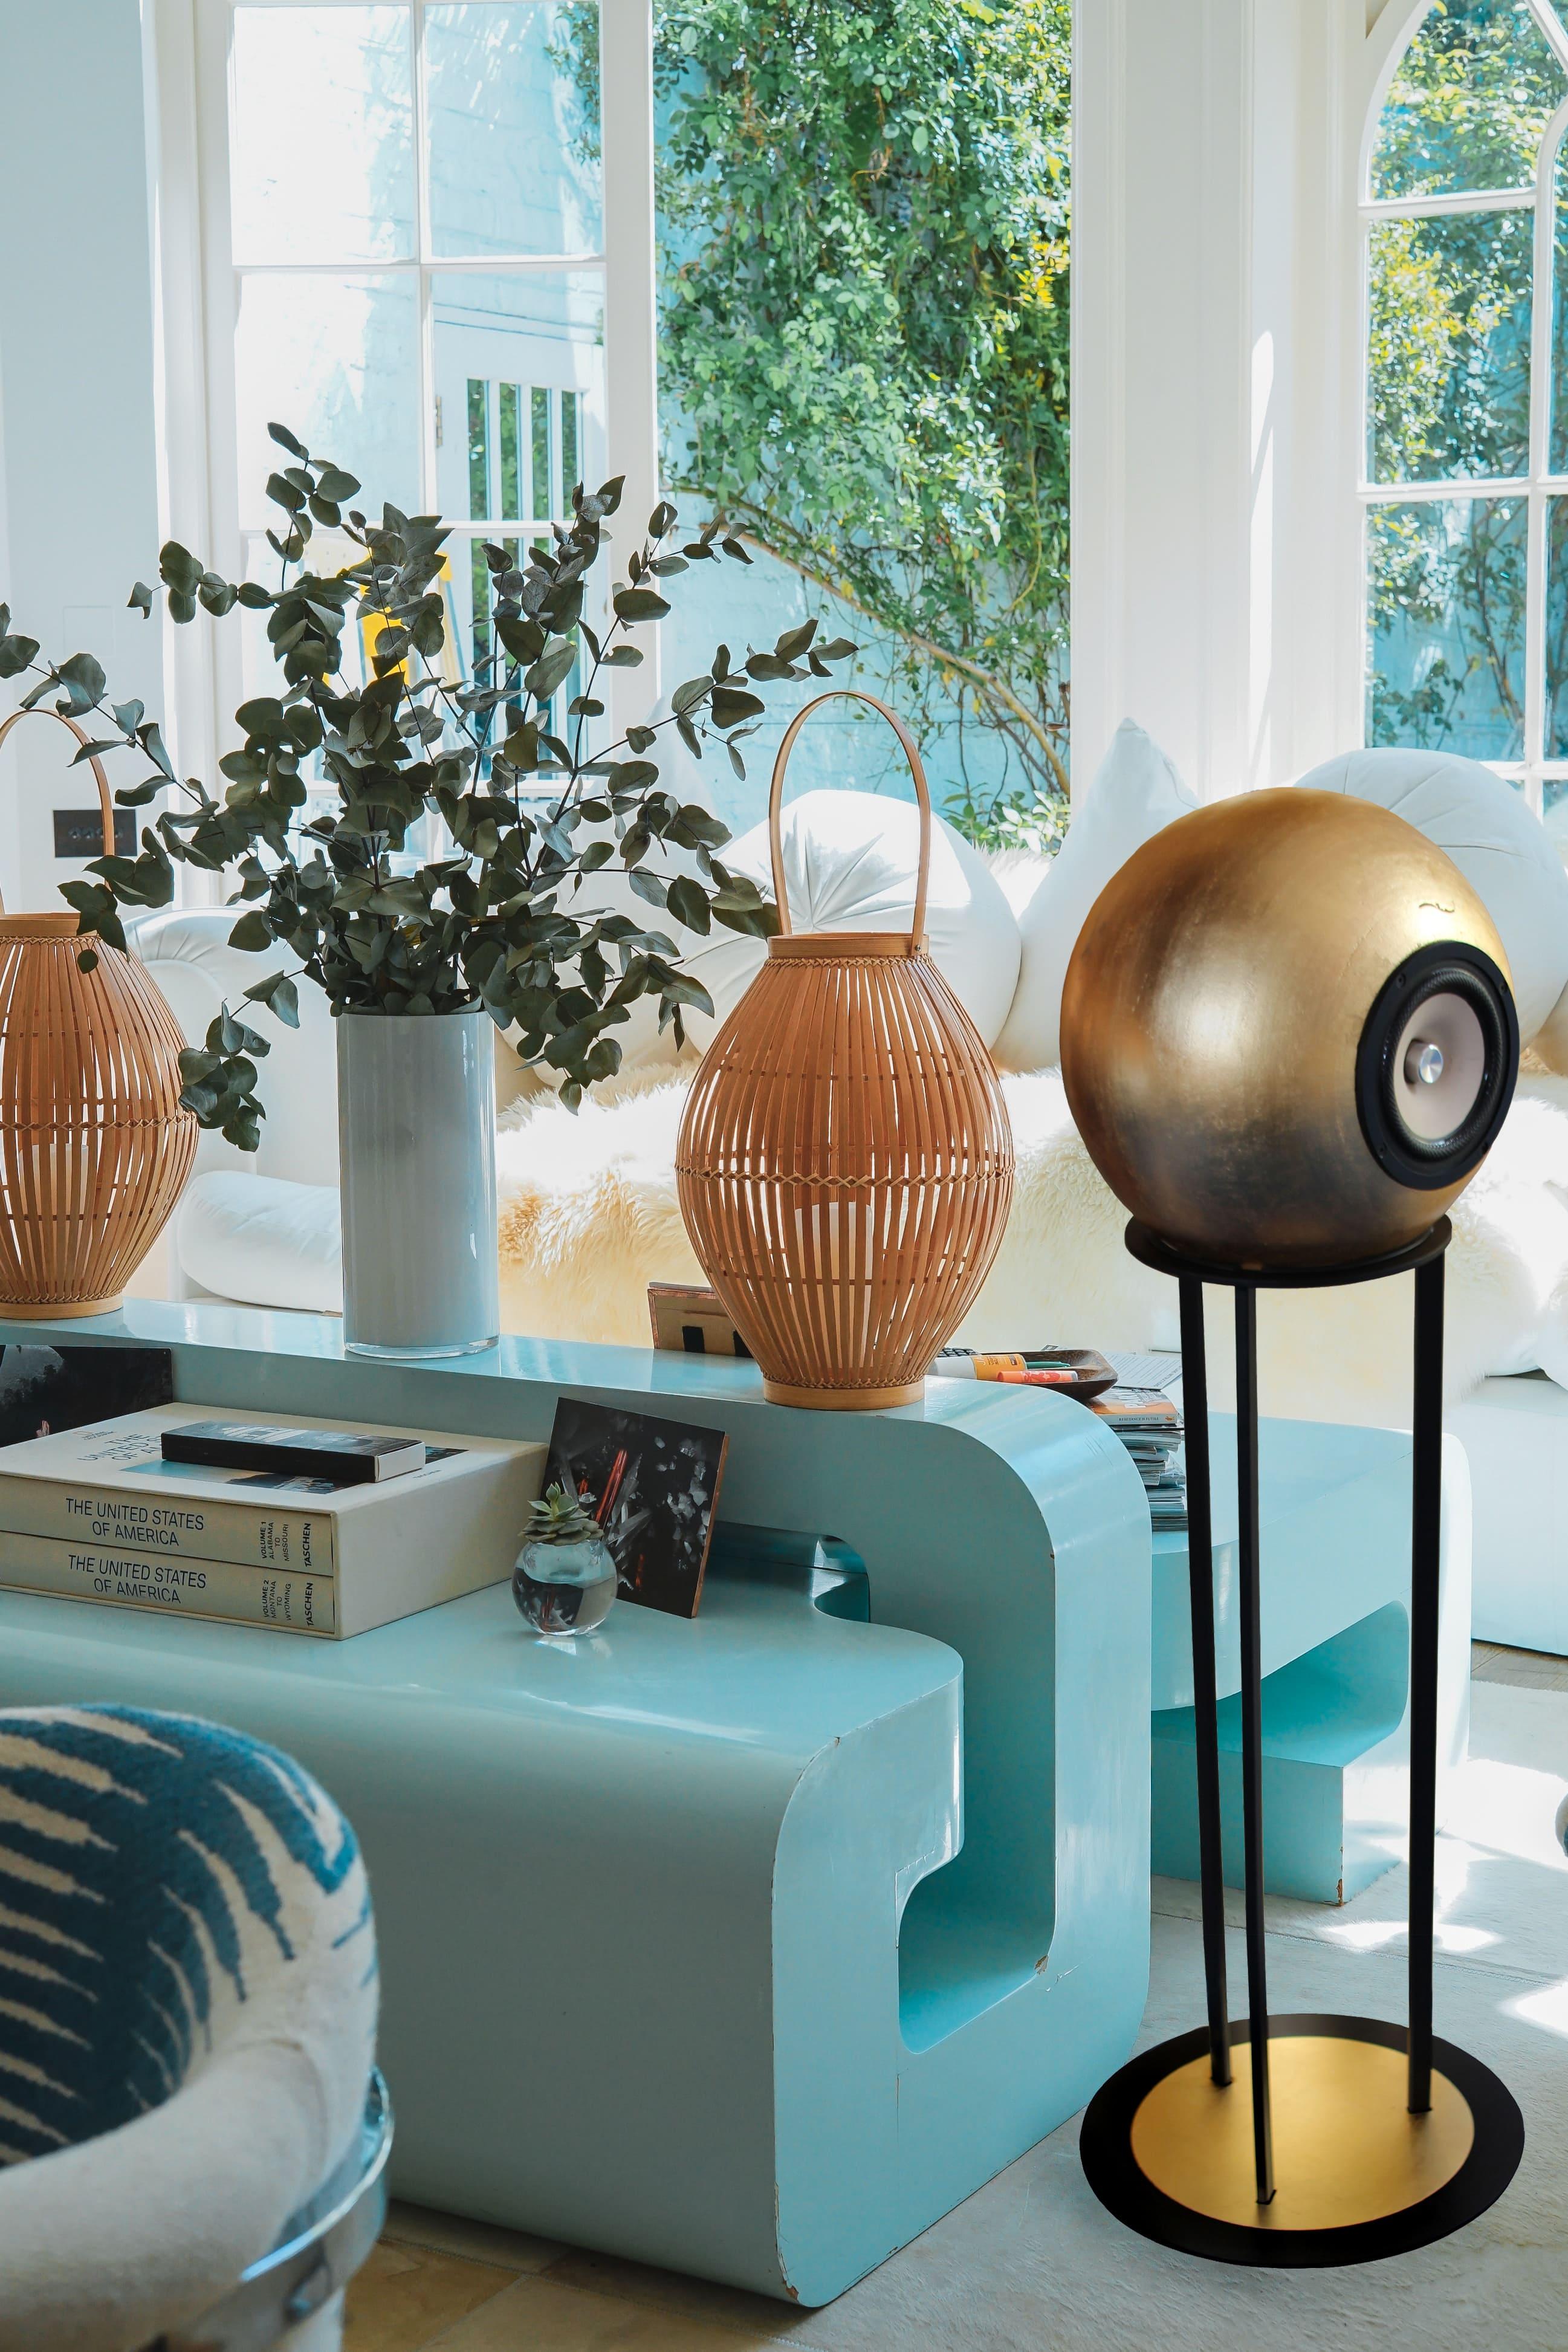 The essential luxury
Dedalica audio systems are handmade with terracotta, using the centuries-old principles and techniques of the ceramic craftsmanship of Impruneta, the same ones used by Brunelleschi to build the cupola of the Duomo of Florence.